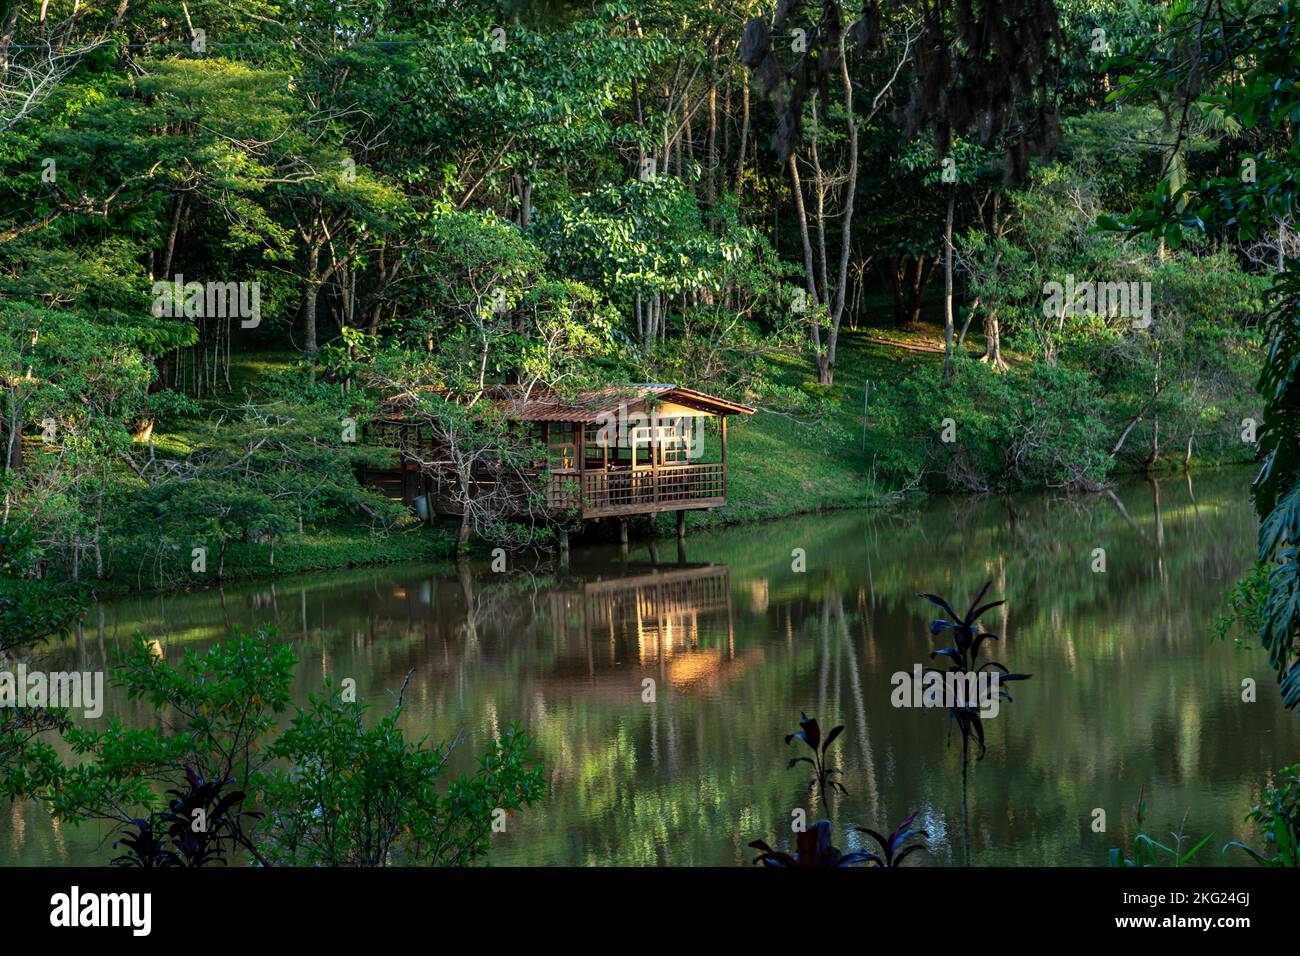 wooden house on the shore of a lake in nature Stock Photo